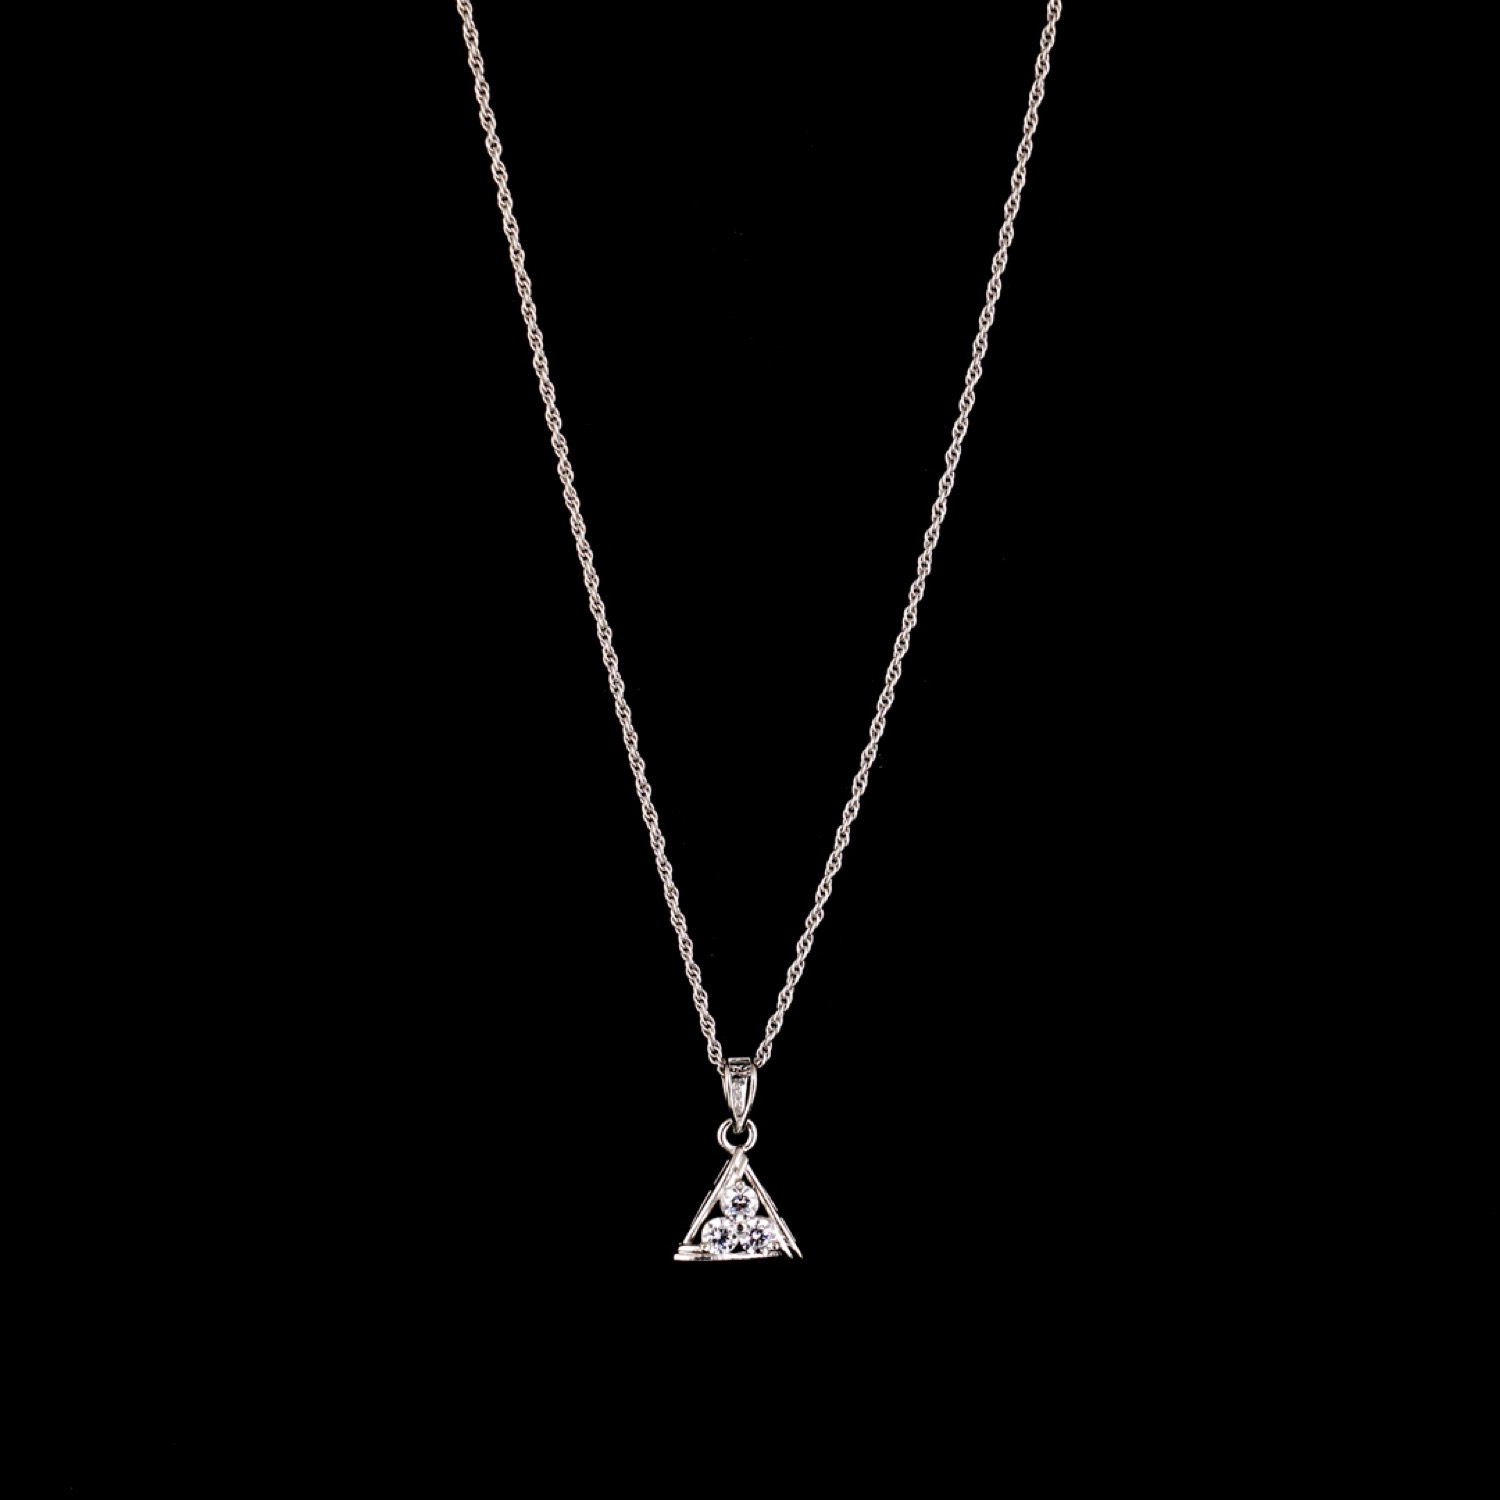 varam_chains_triangle_shape_three_stone_pendant_with_rope_silver_chain-1